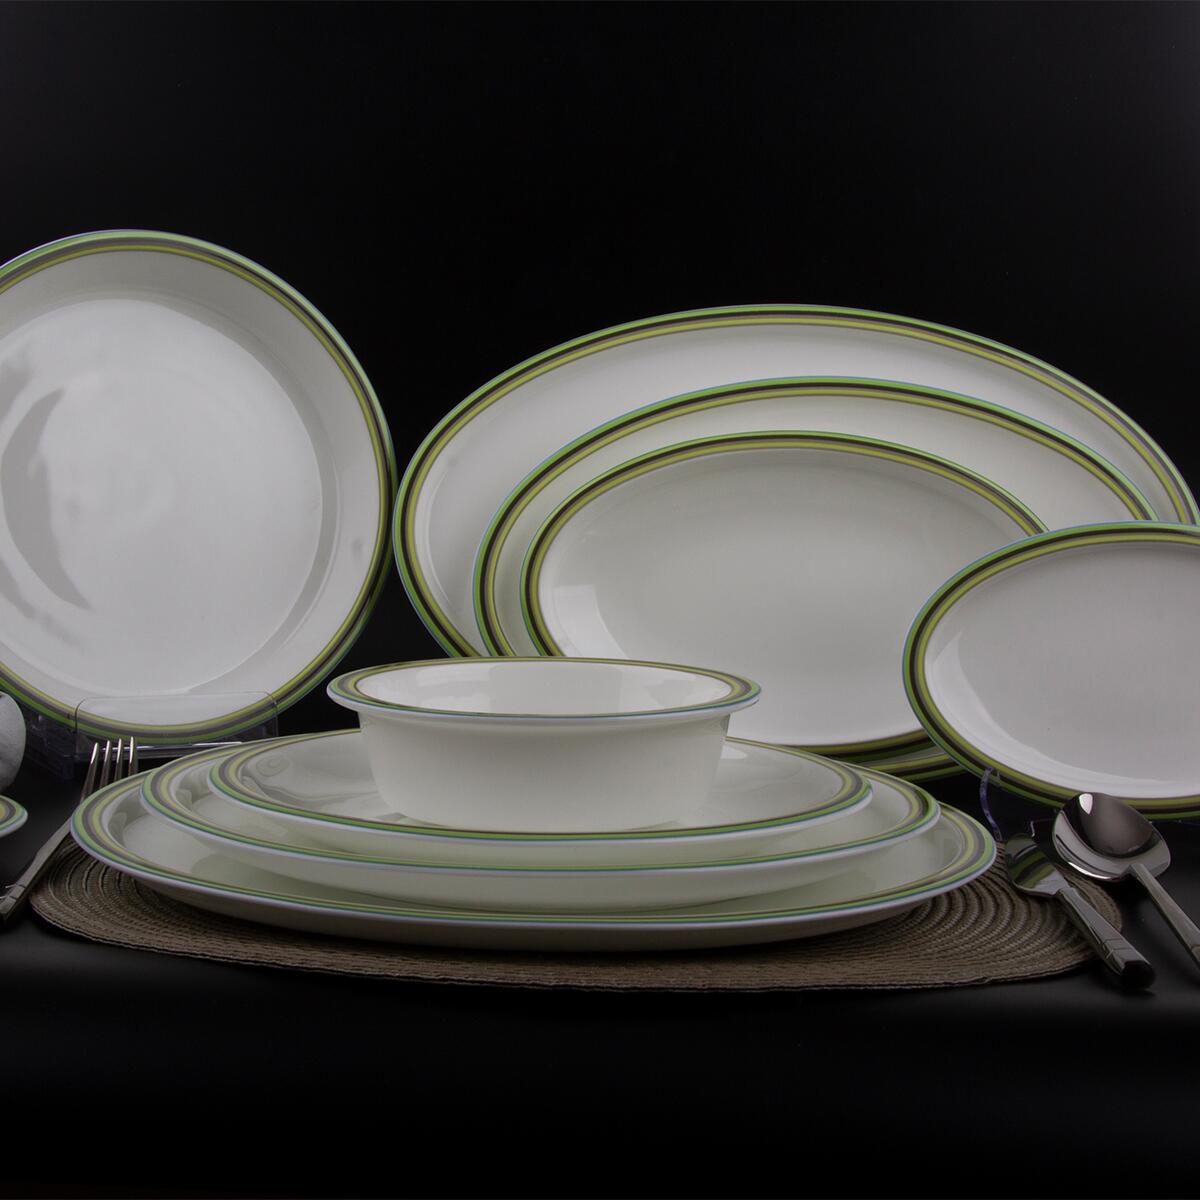 Evaliza Alaia Green 60 Piece Dinner Set for 12 Persons